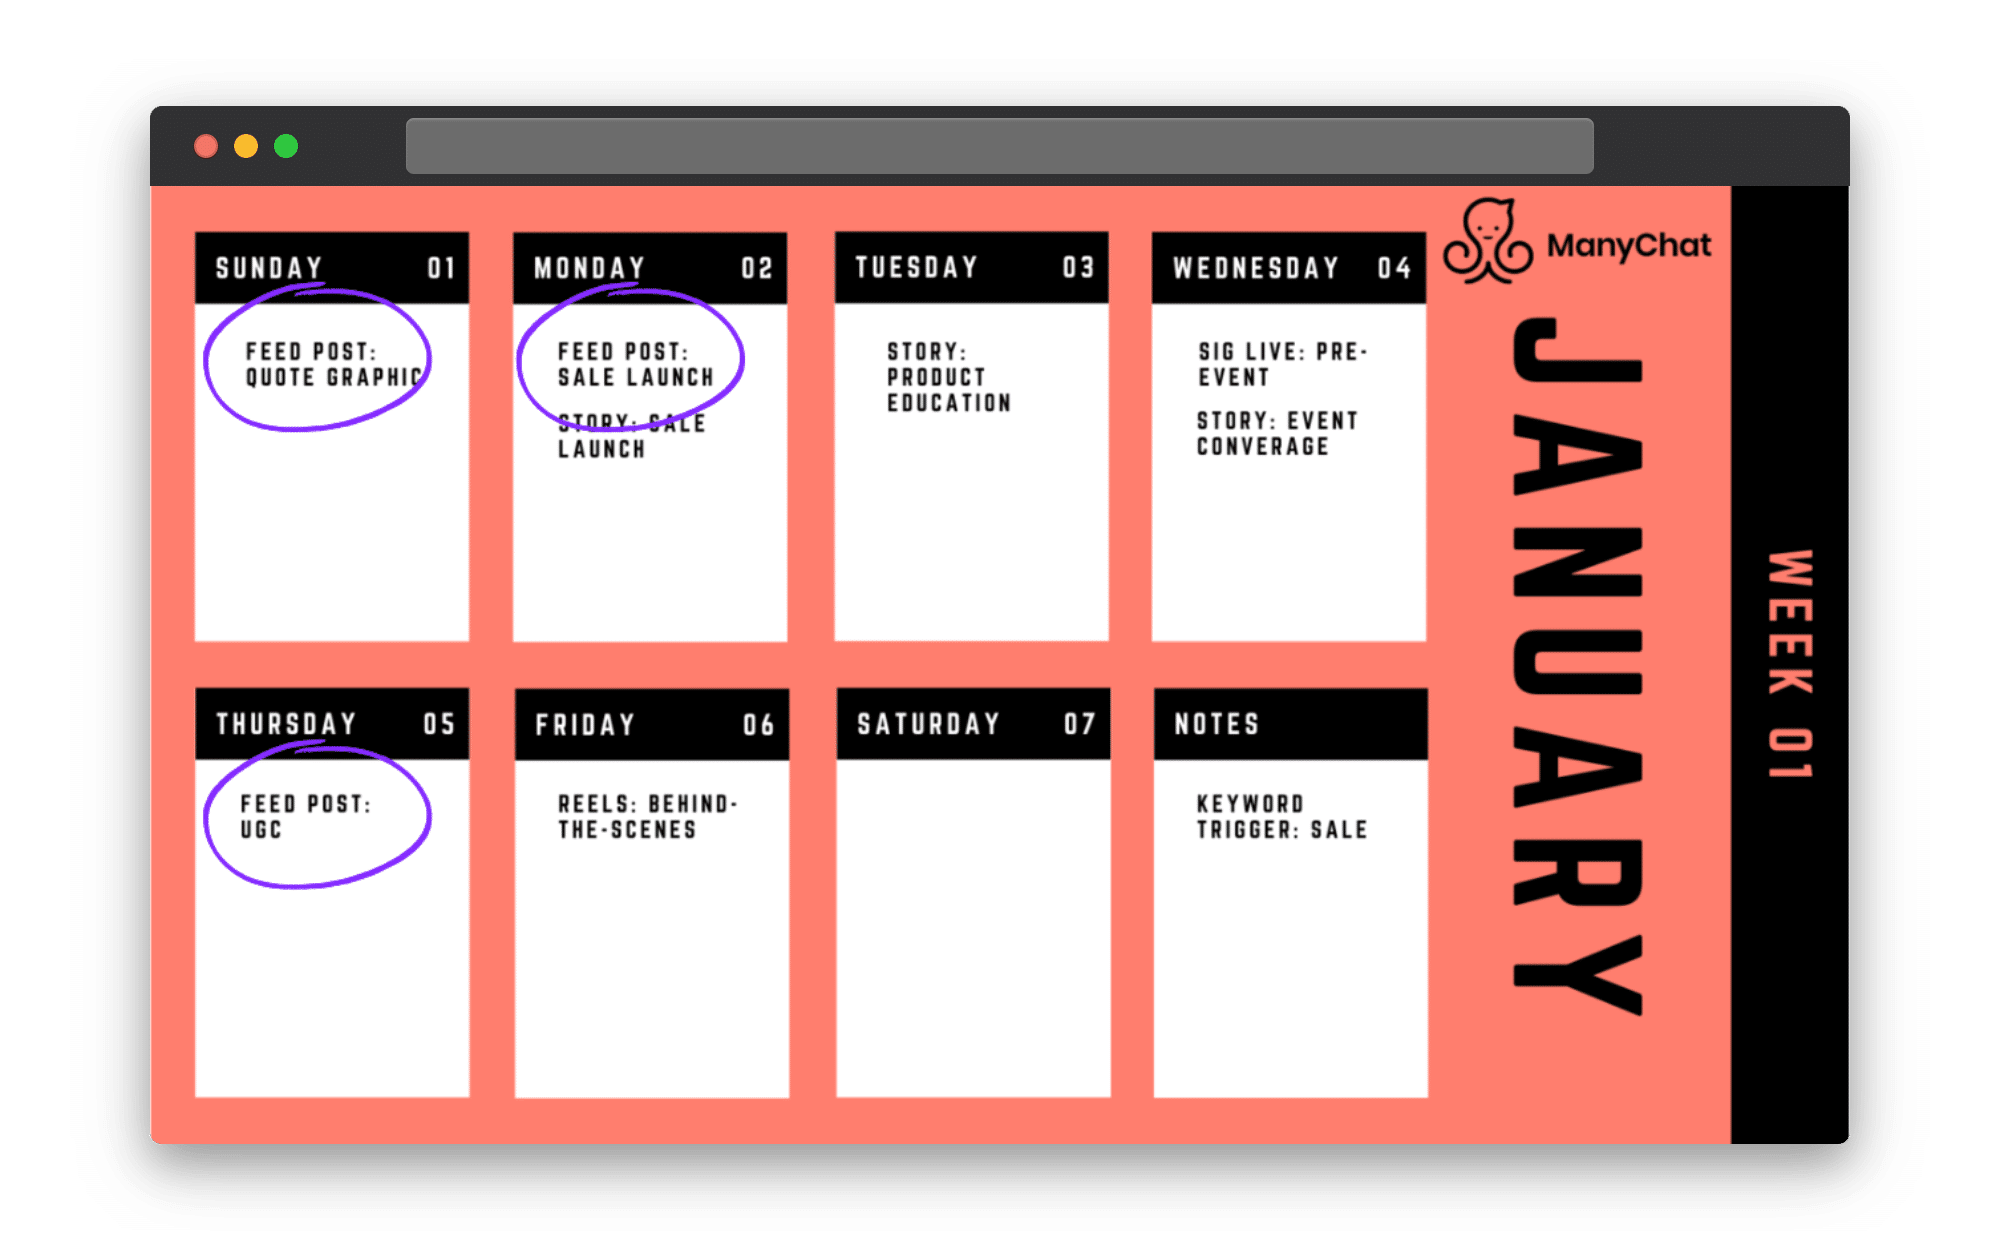 Here is an example of what your content calendar could look like. This one aims to post 3x per week.